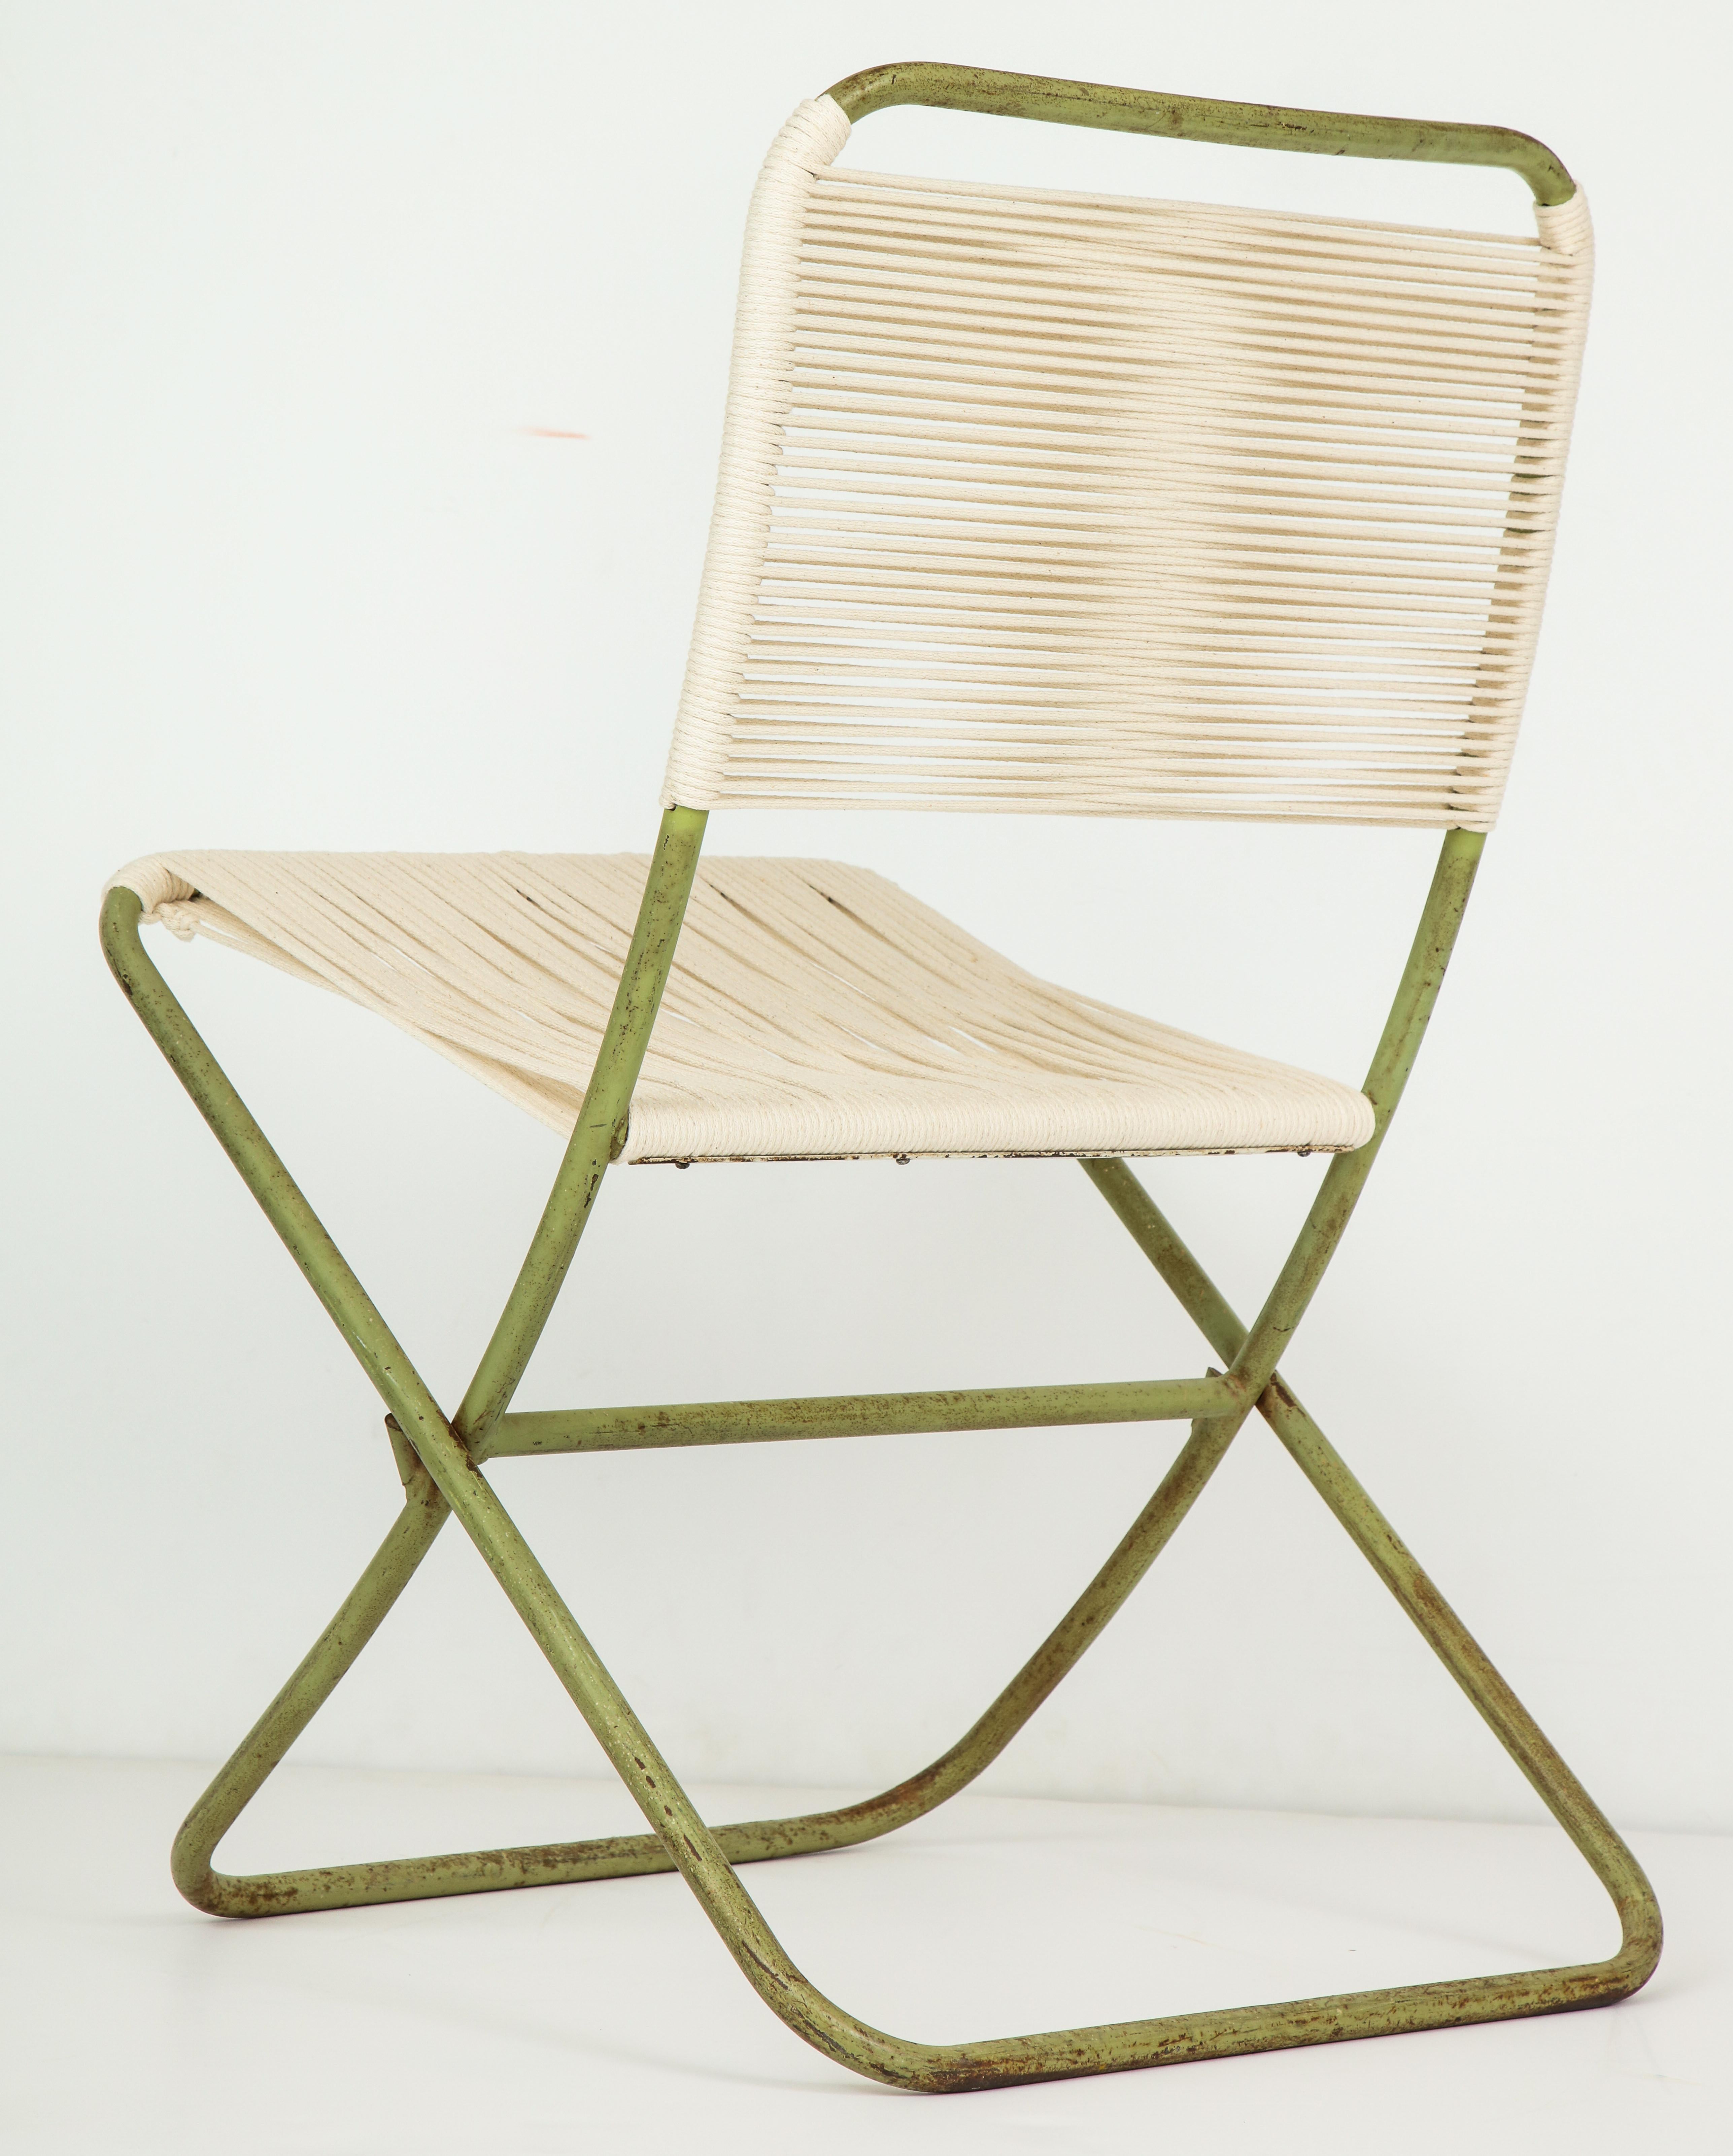 Greta Grossman Folding Chair In Good Condition For Sale In New York, NY